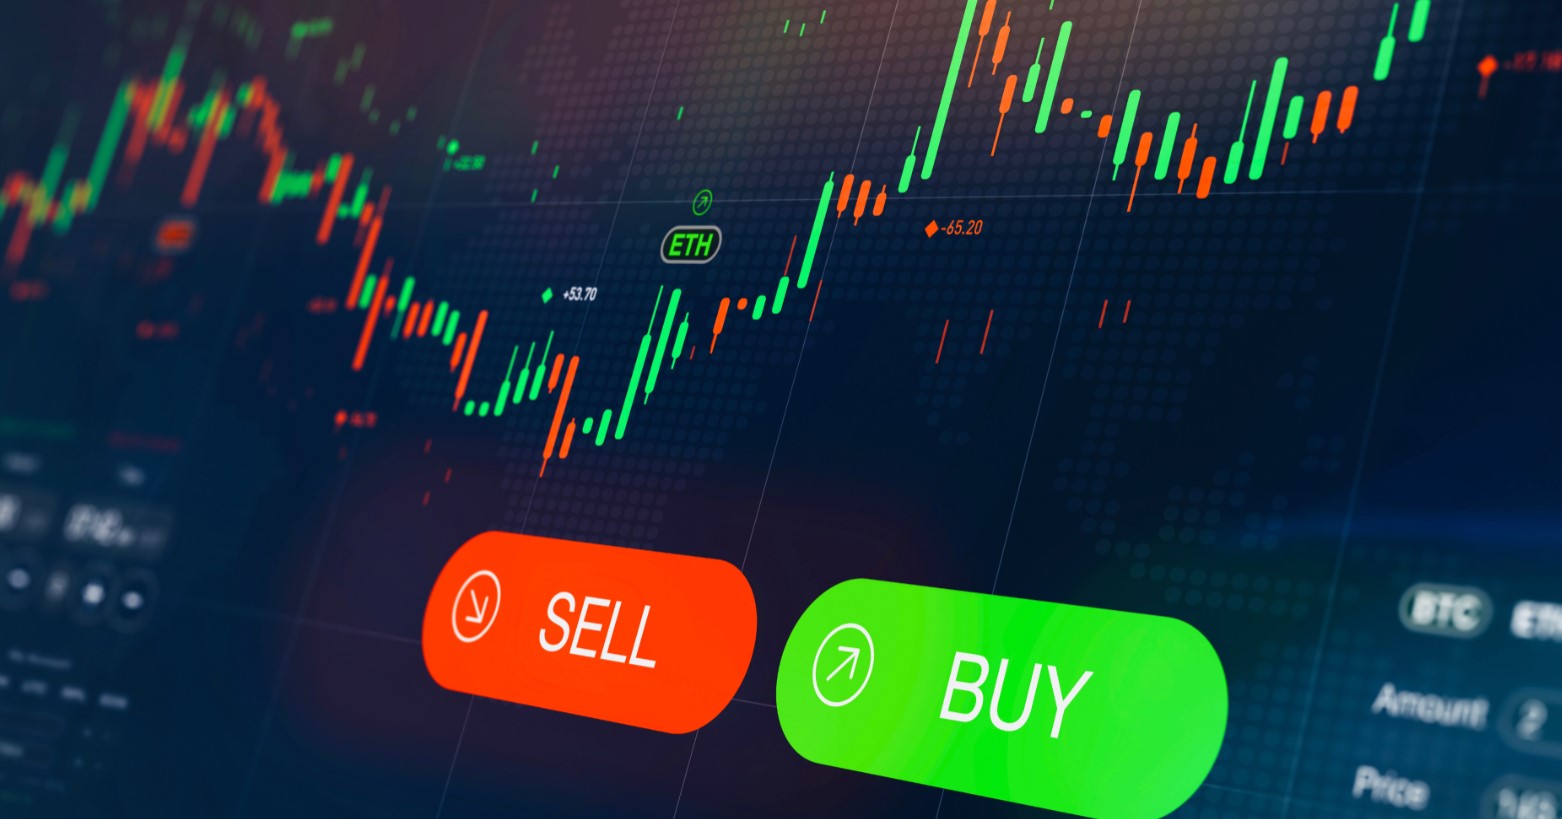 how do i know when to buy and sell crypto